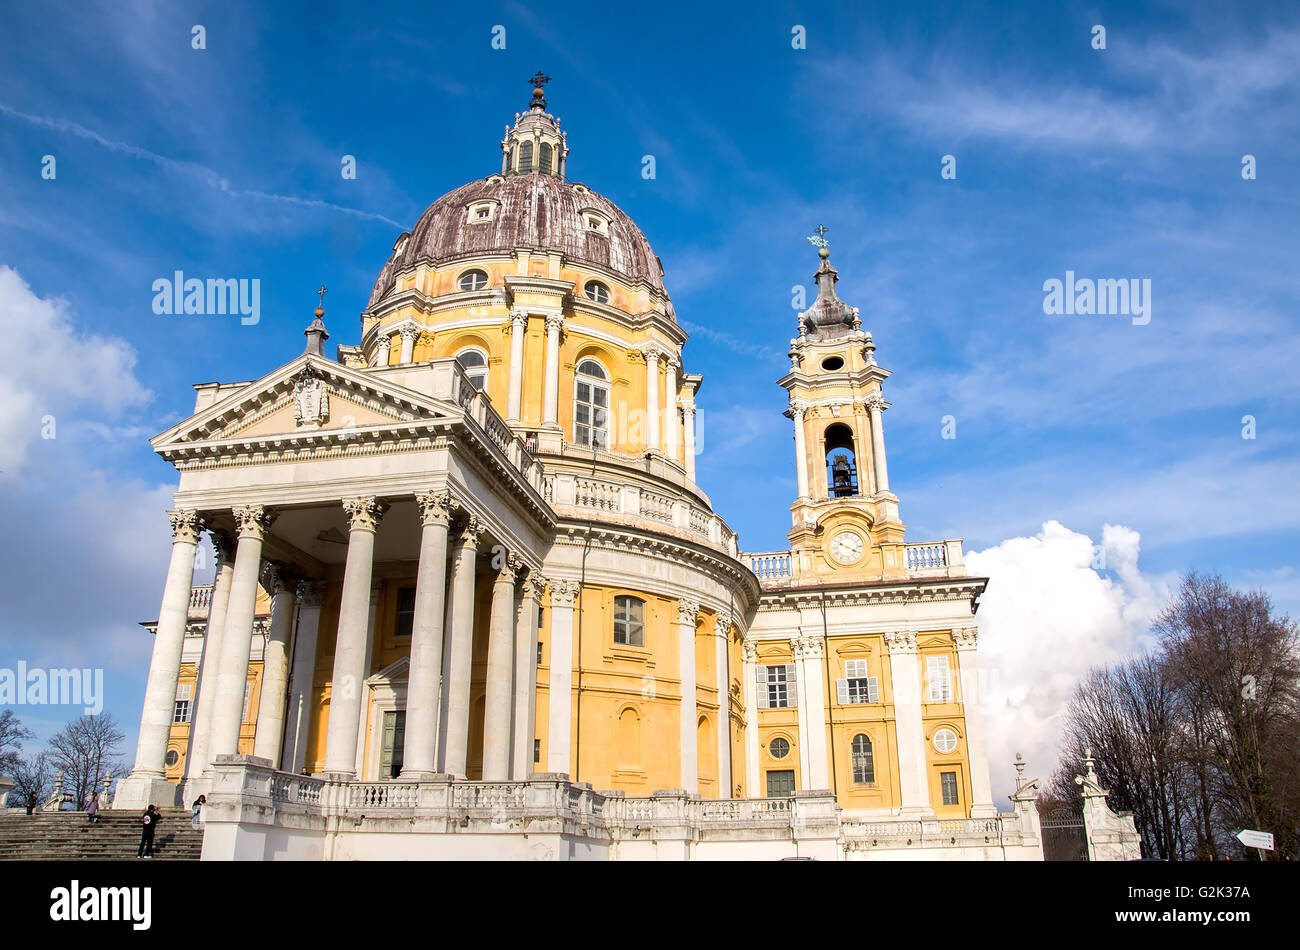 The Superga basilica from the outside Stock Photo